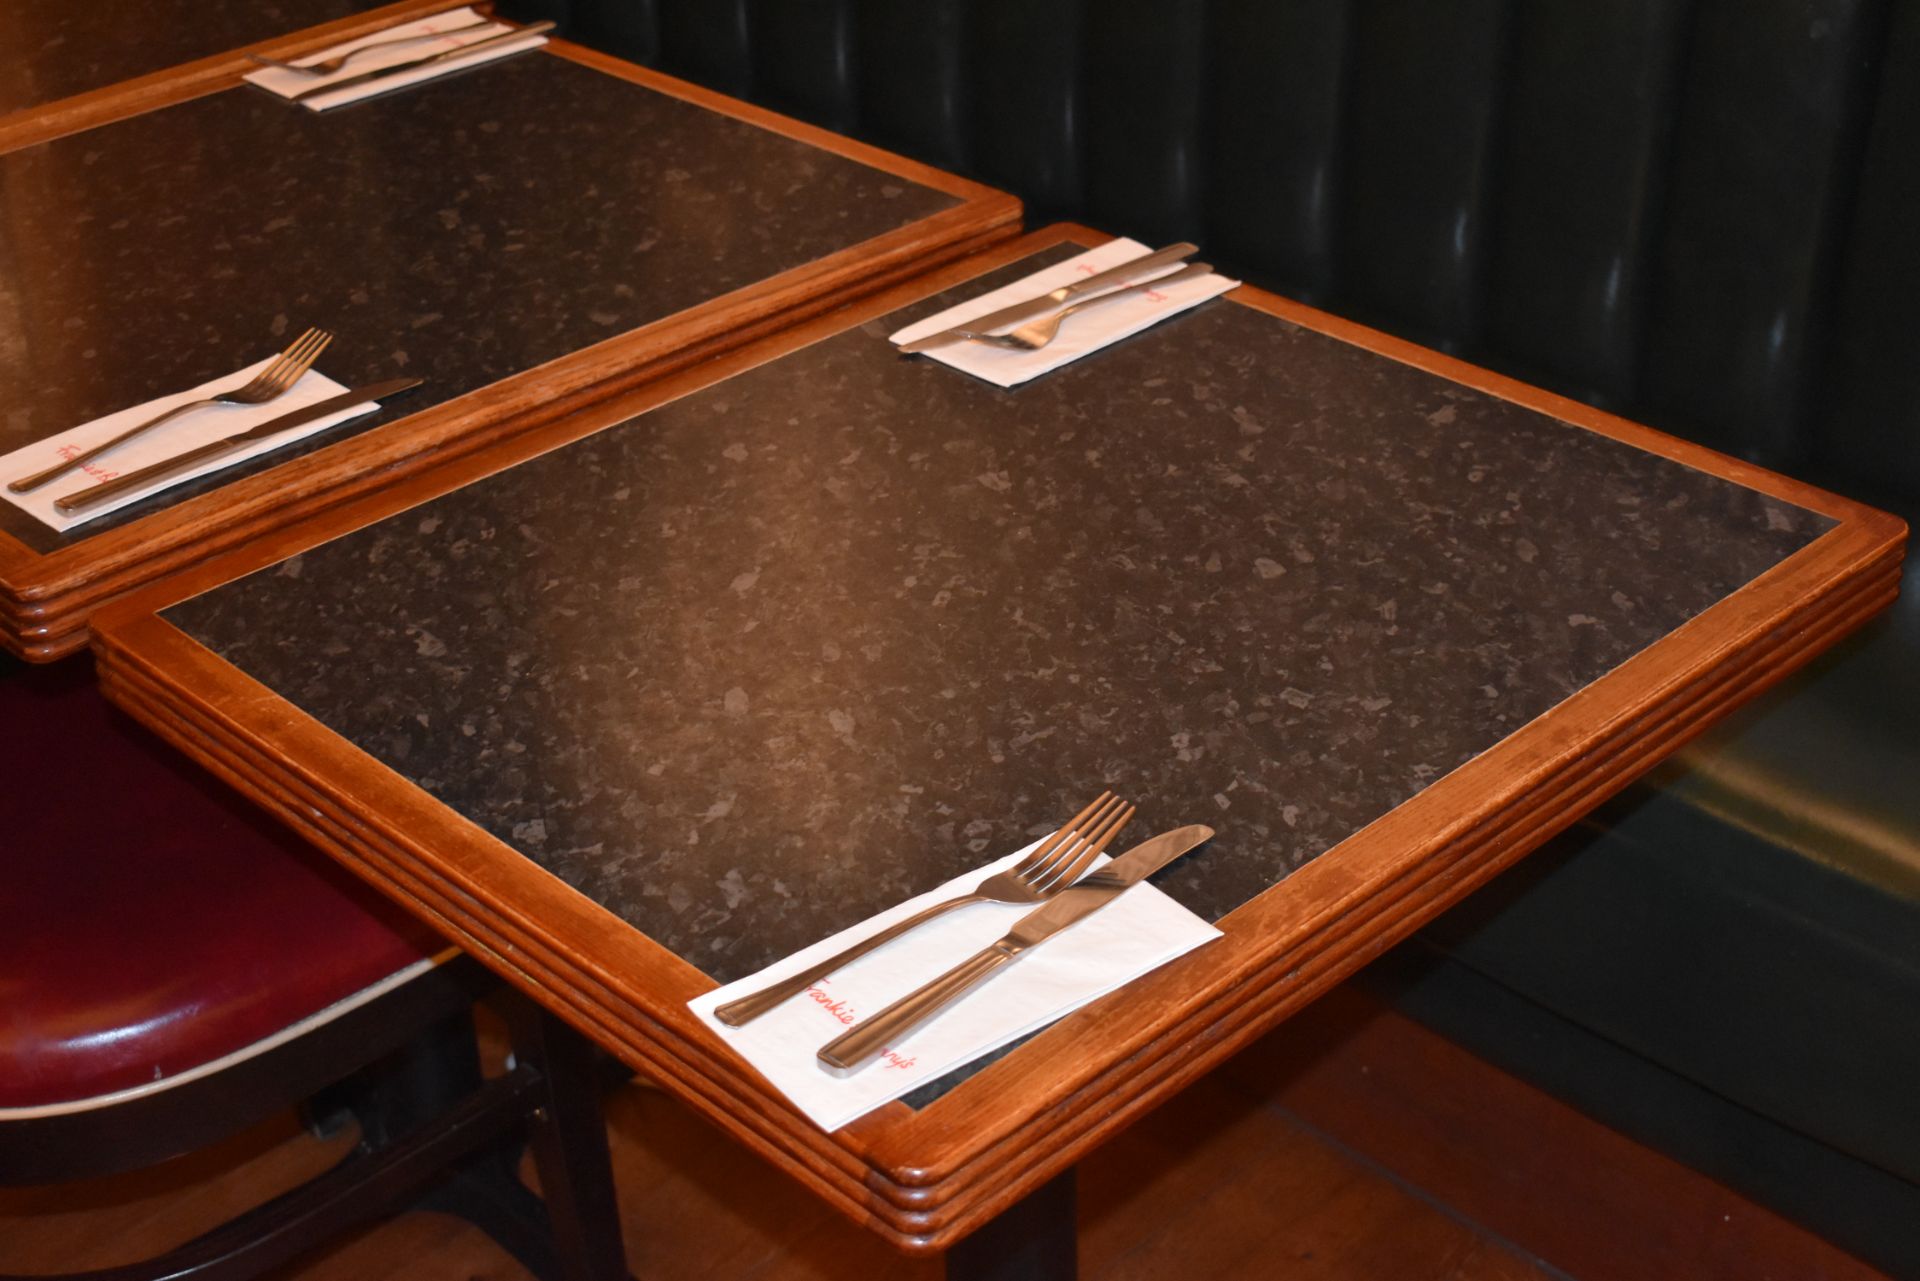 4 x Restaurant Bistro Tables With Granite Effect Tops and Cast Iron Bases - From American Italian - Image 5 of 7